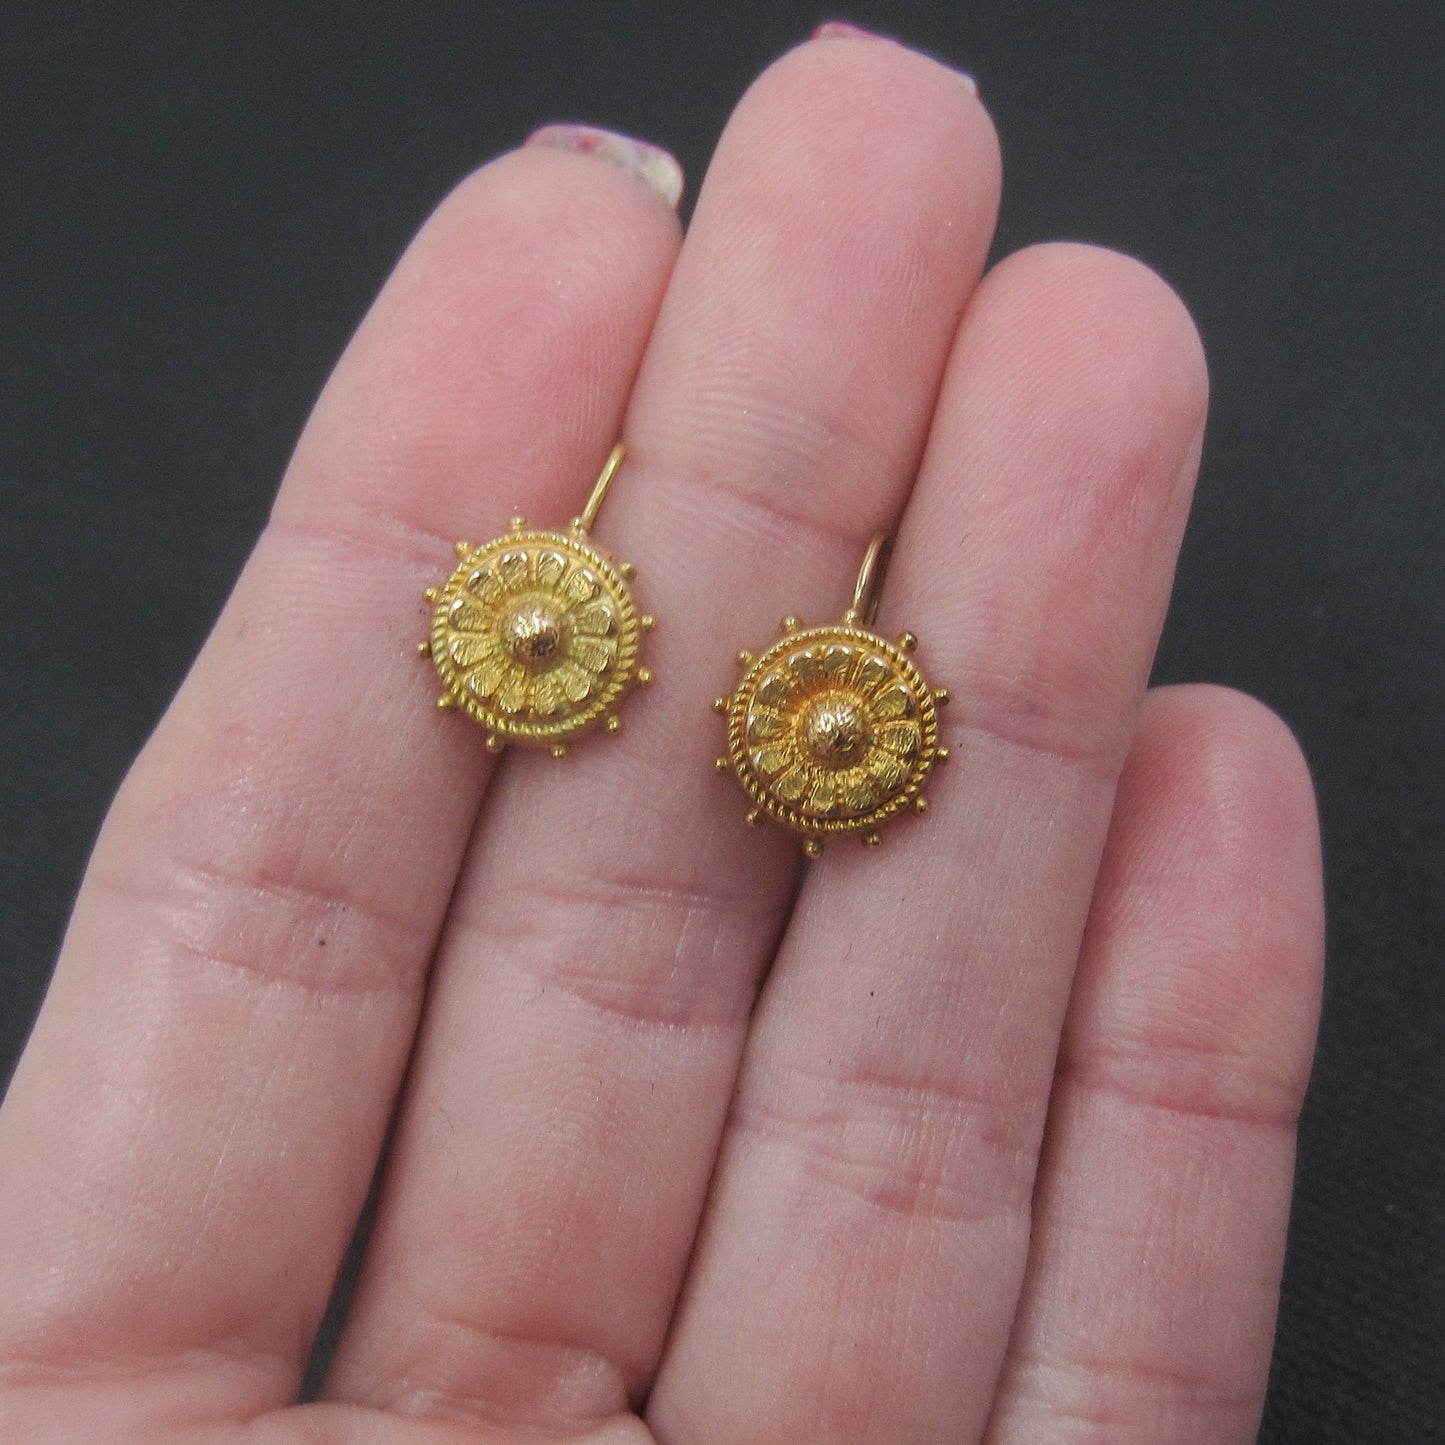 SOLD Victorian Etruscan Revival Small Drop Earrings 15k c. 1880